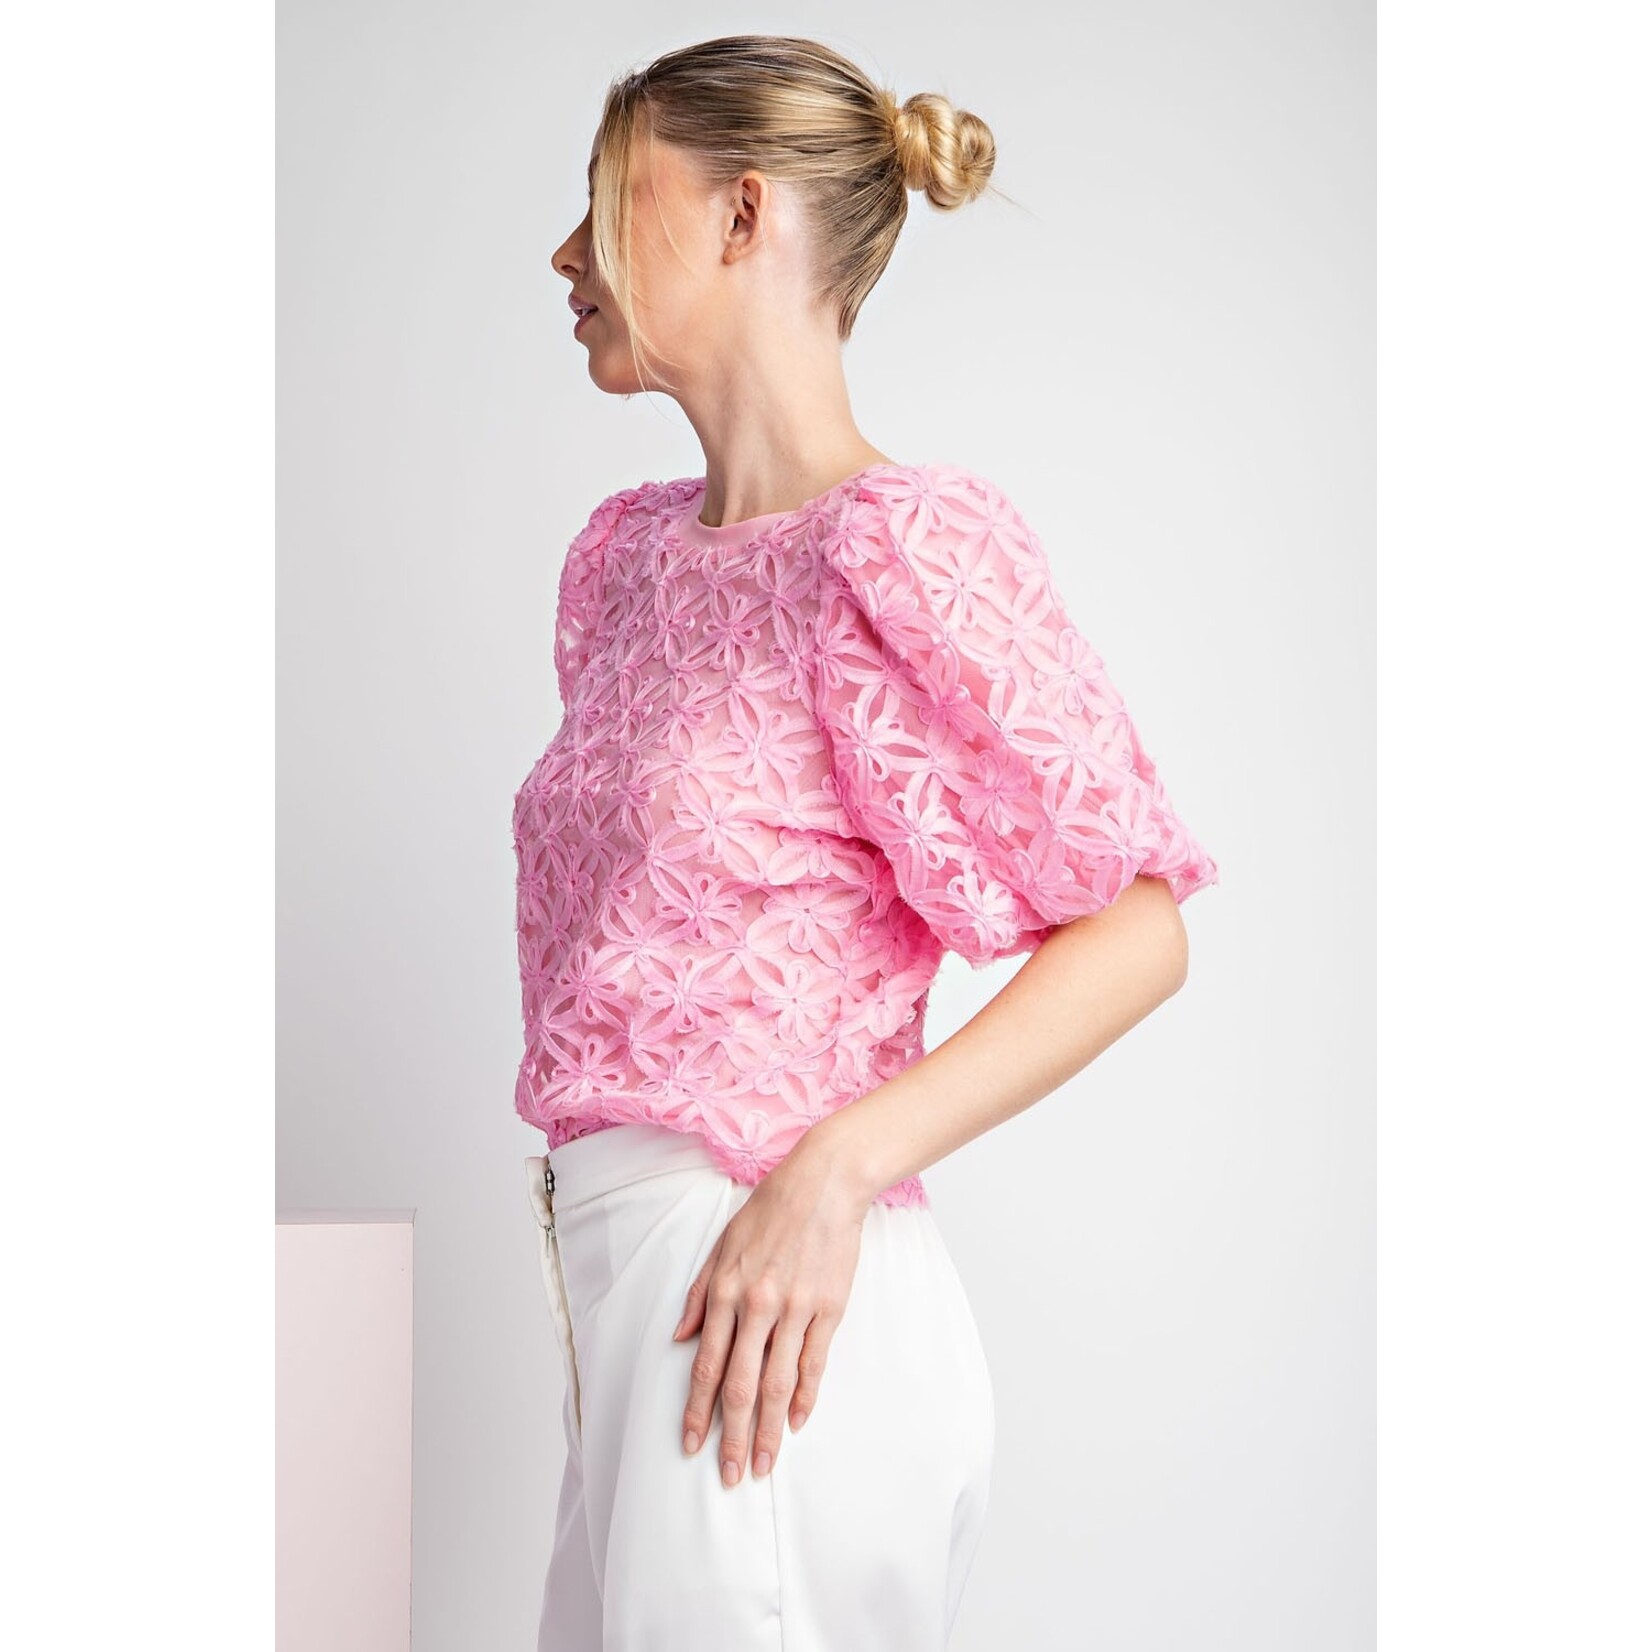 ee:some Emory Rose Pink Floral Lace Blouse